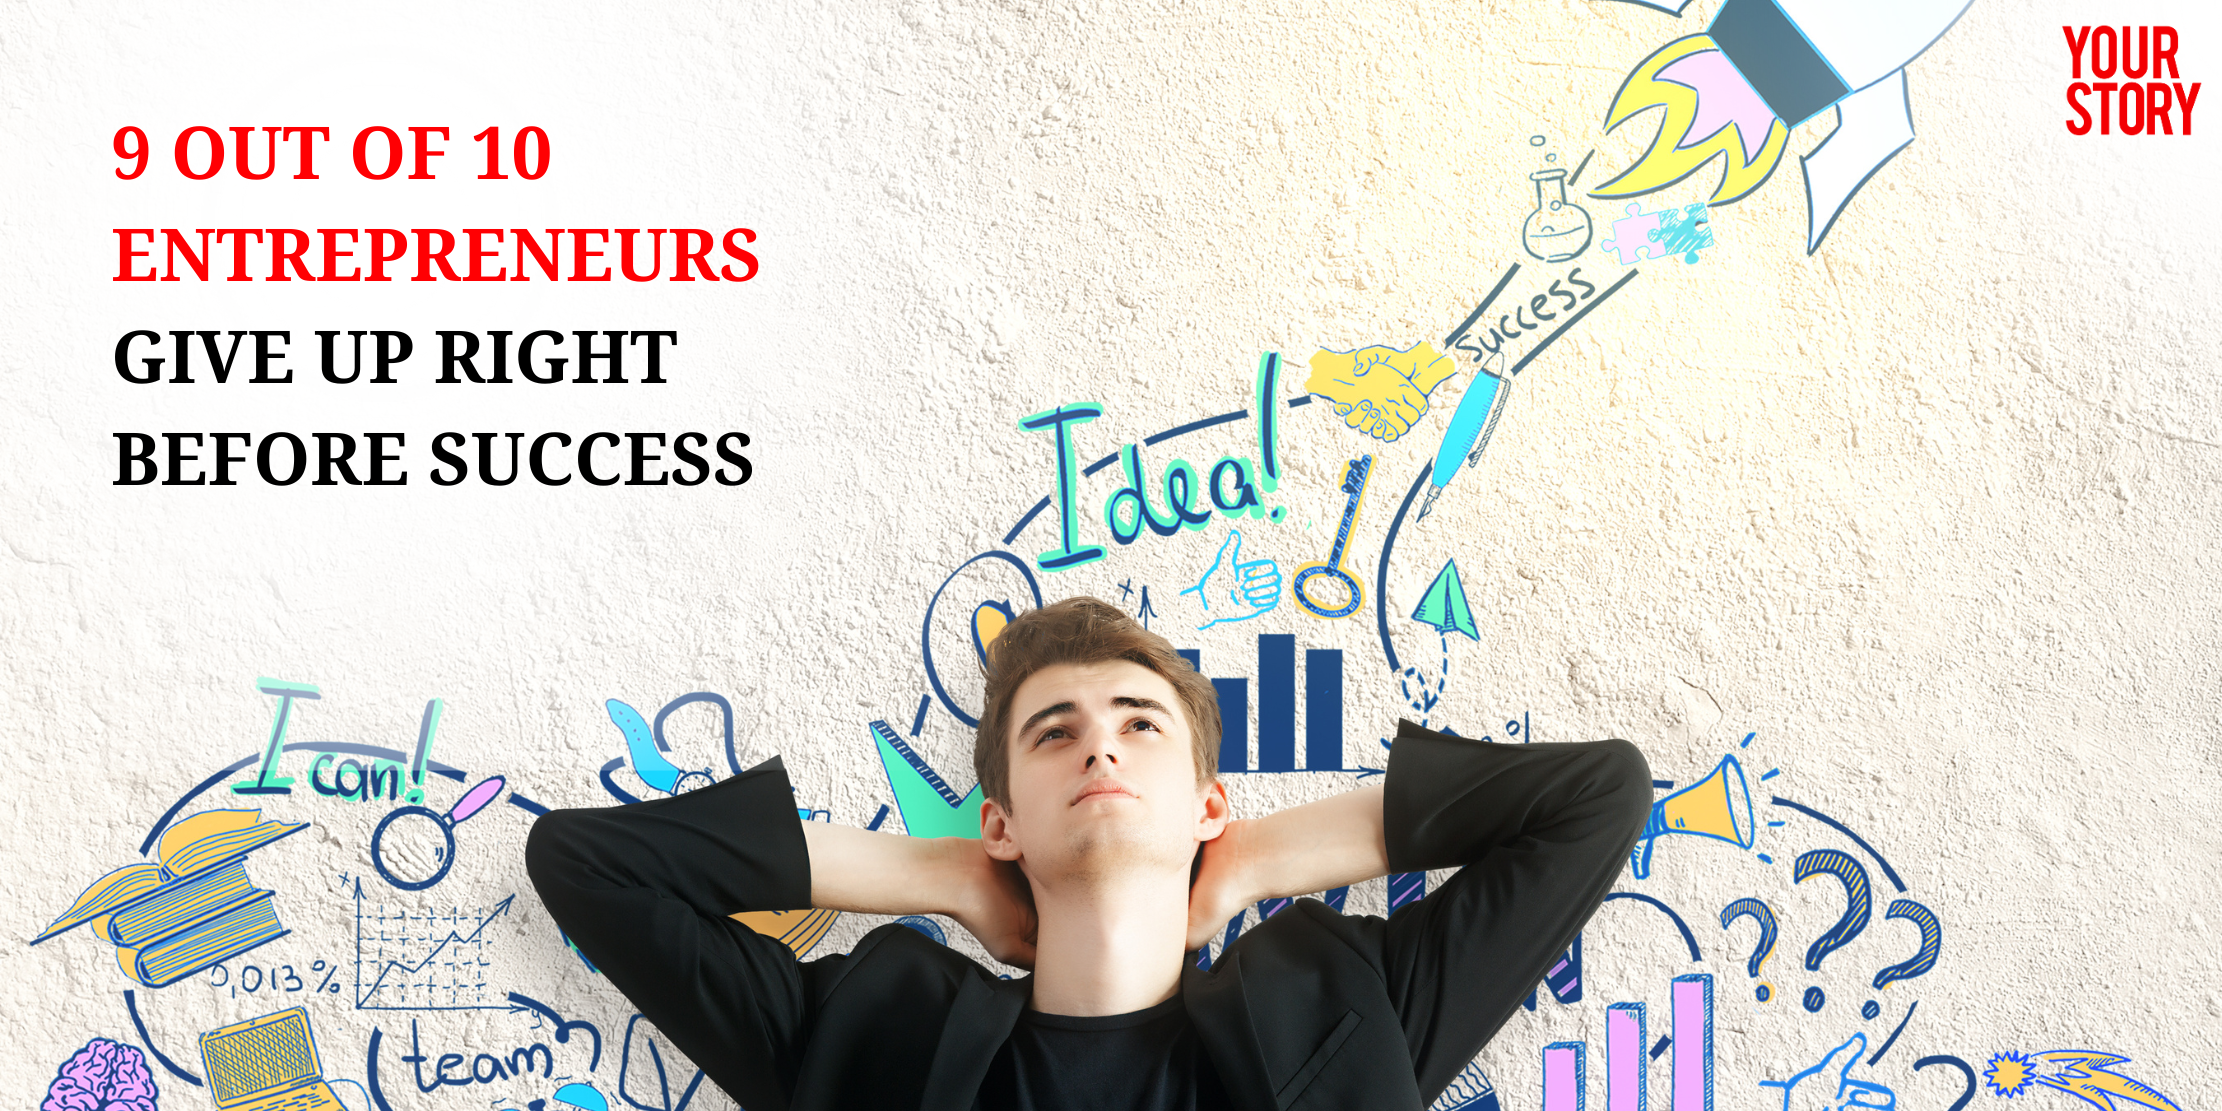 Why ⁠⁠9 Out of 10 Entrepreneurs Give Up Right Before Success?